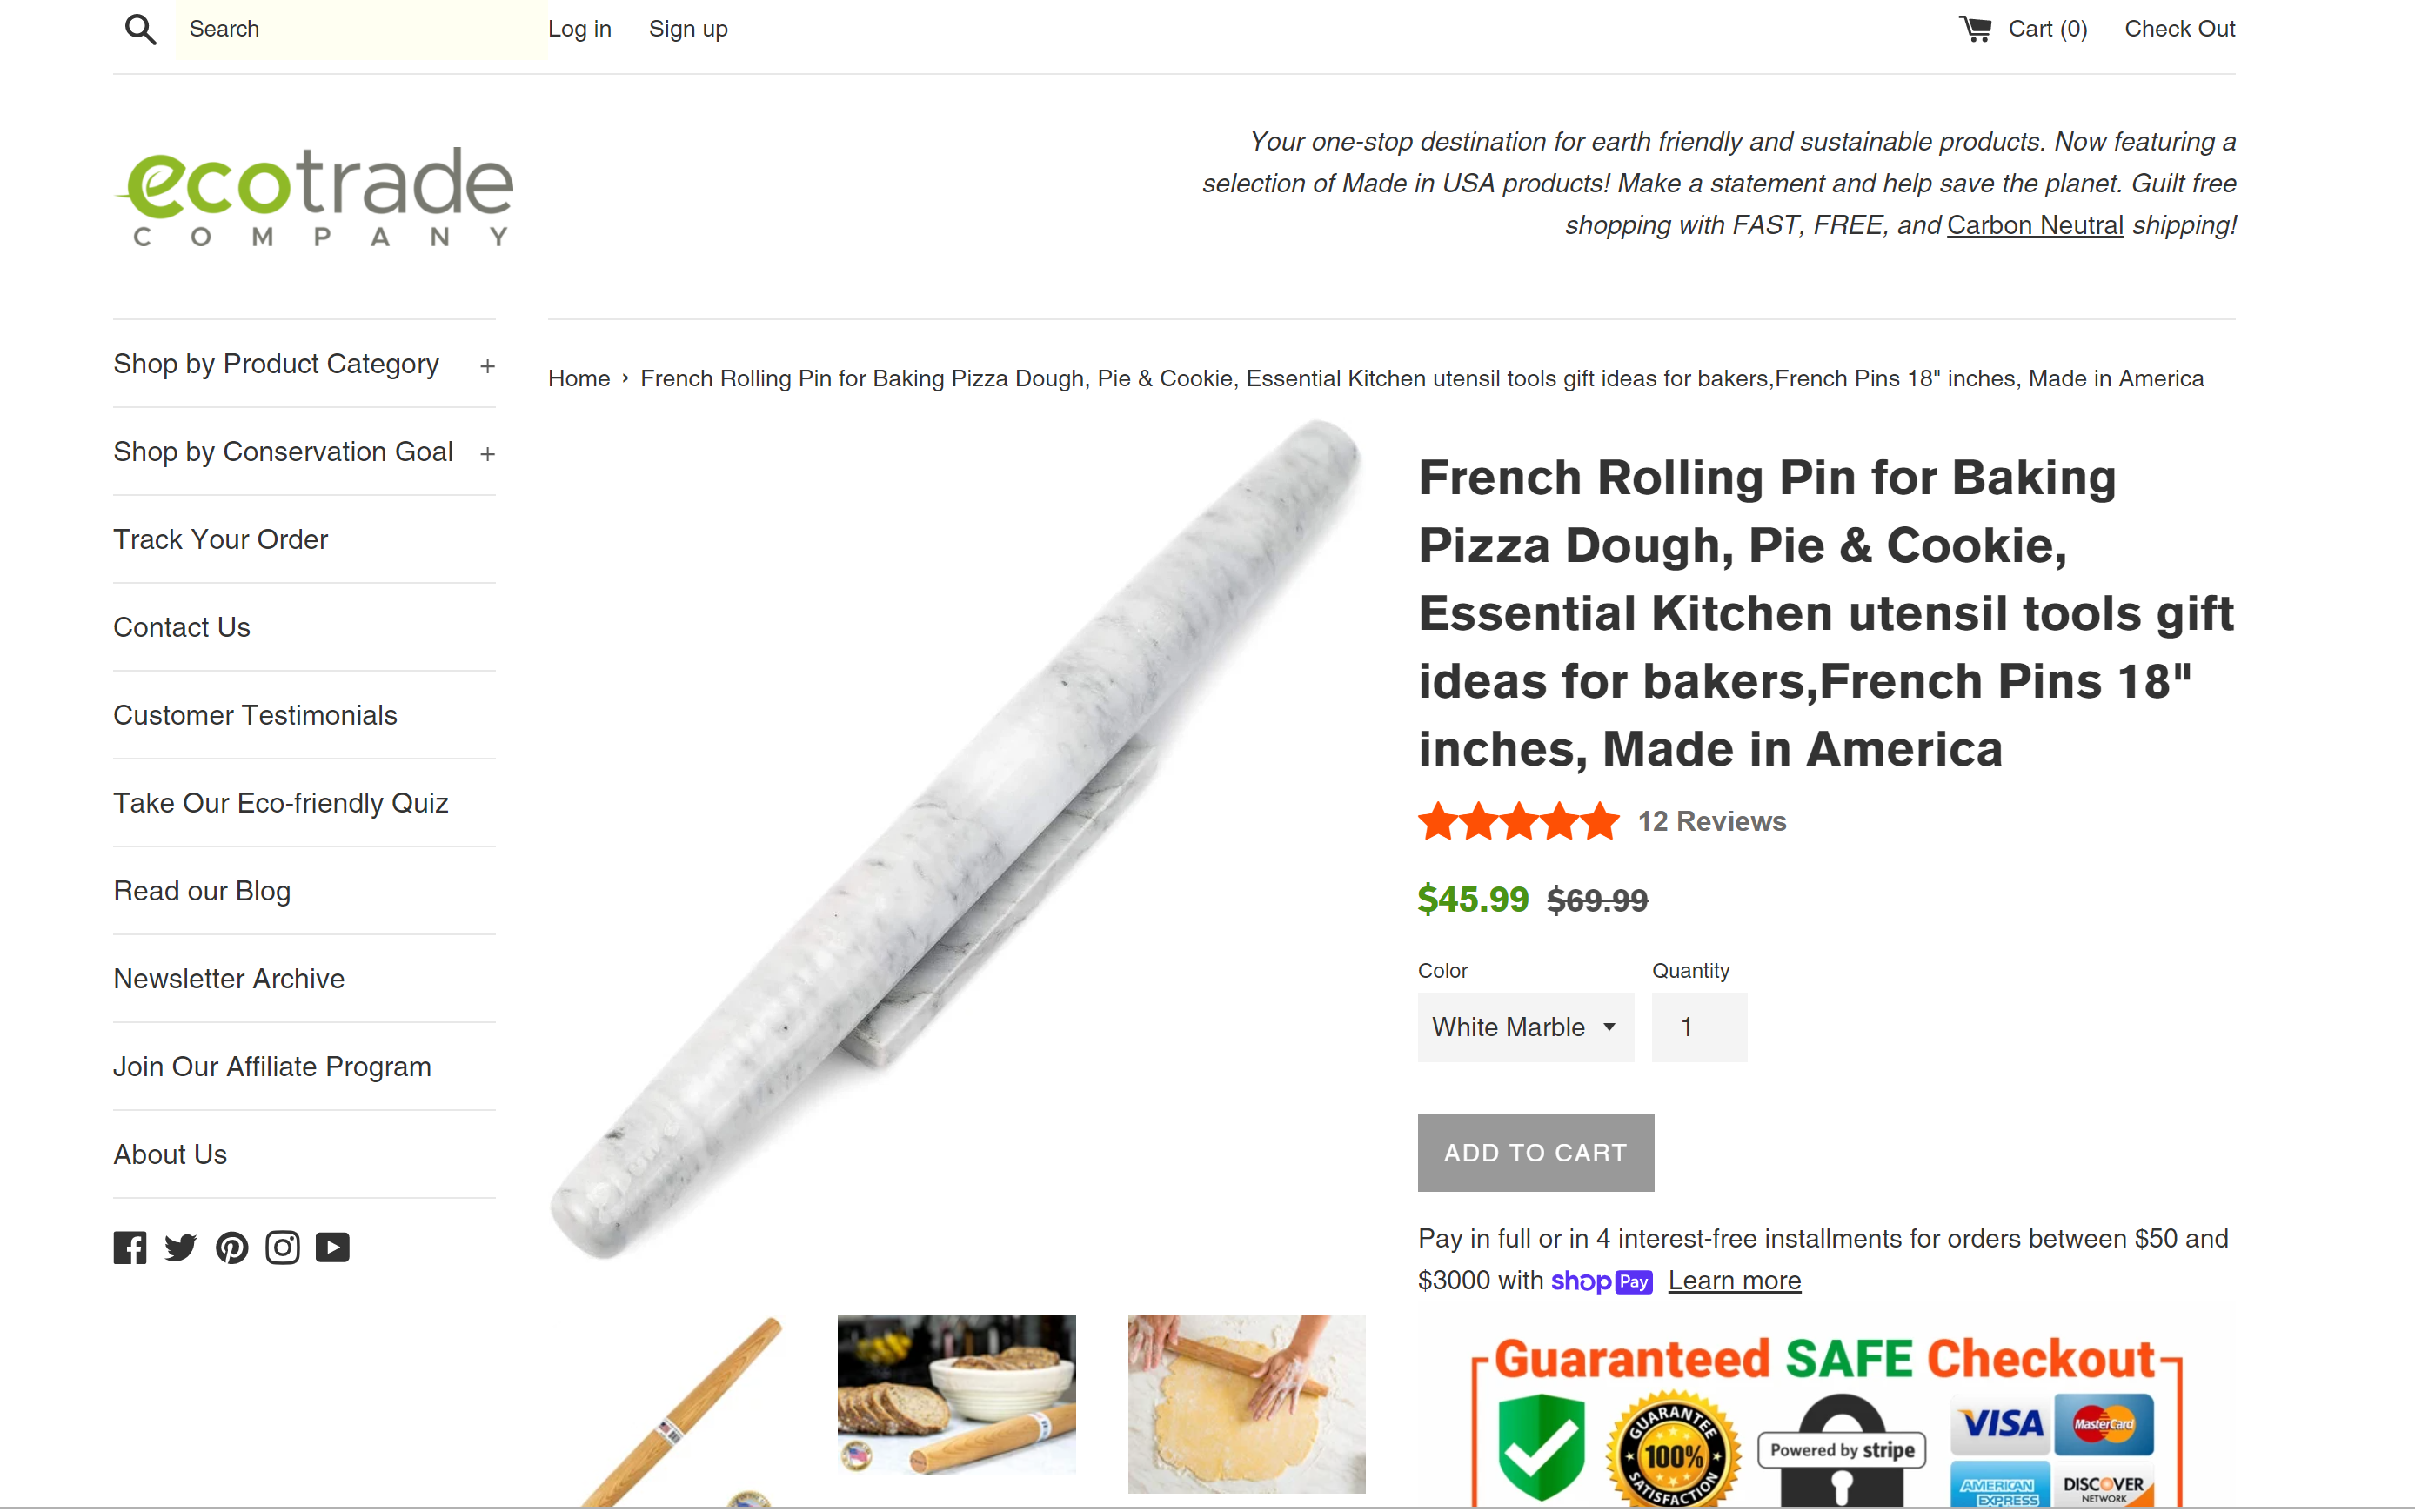 Screenshot from their website: 18 inches. $45.99 